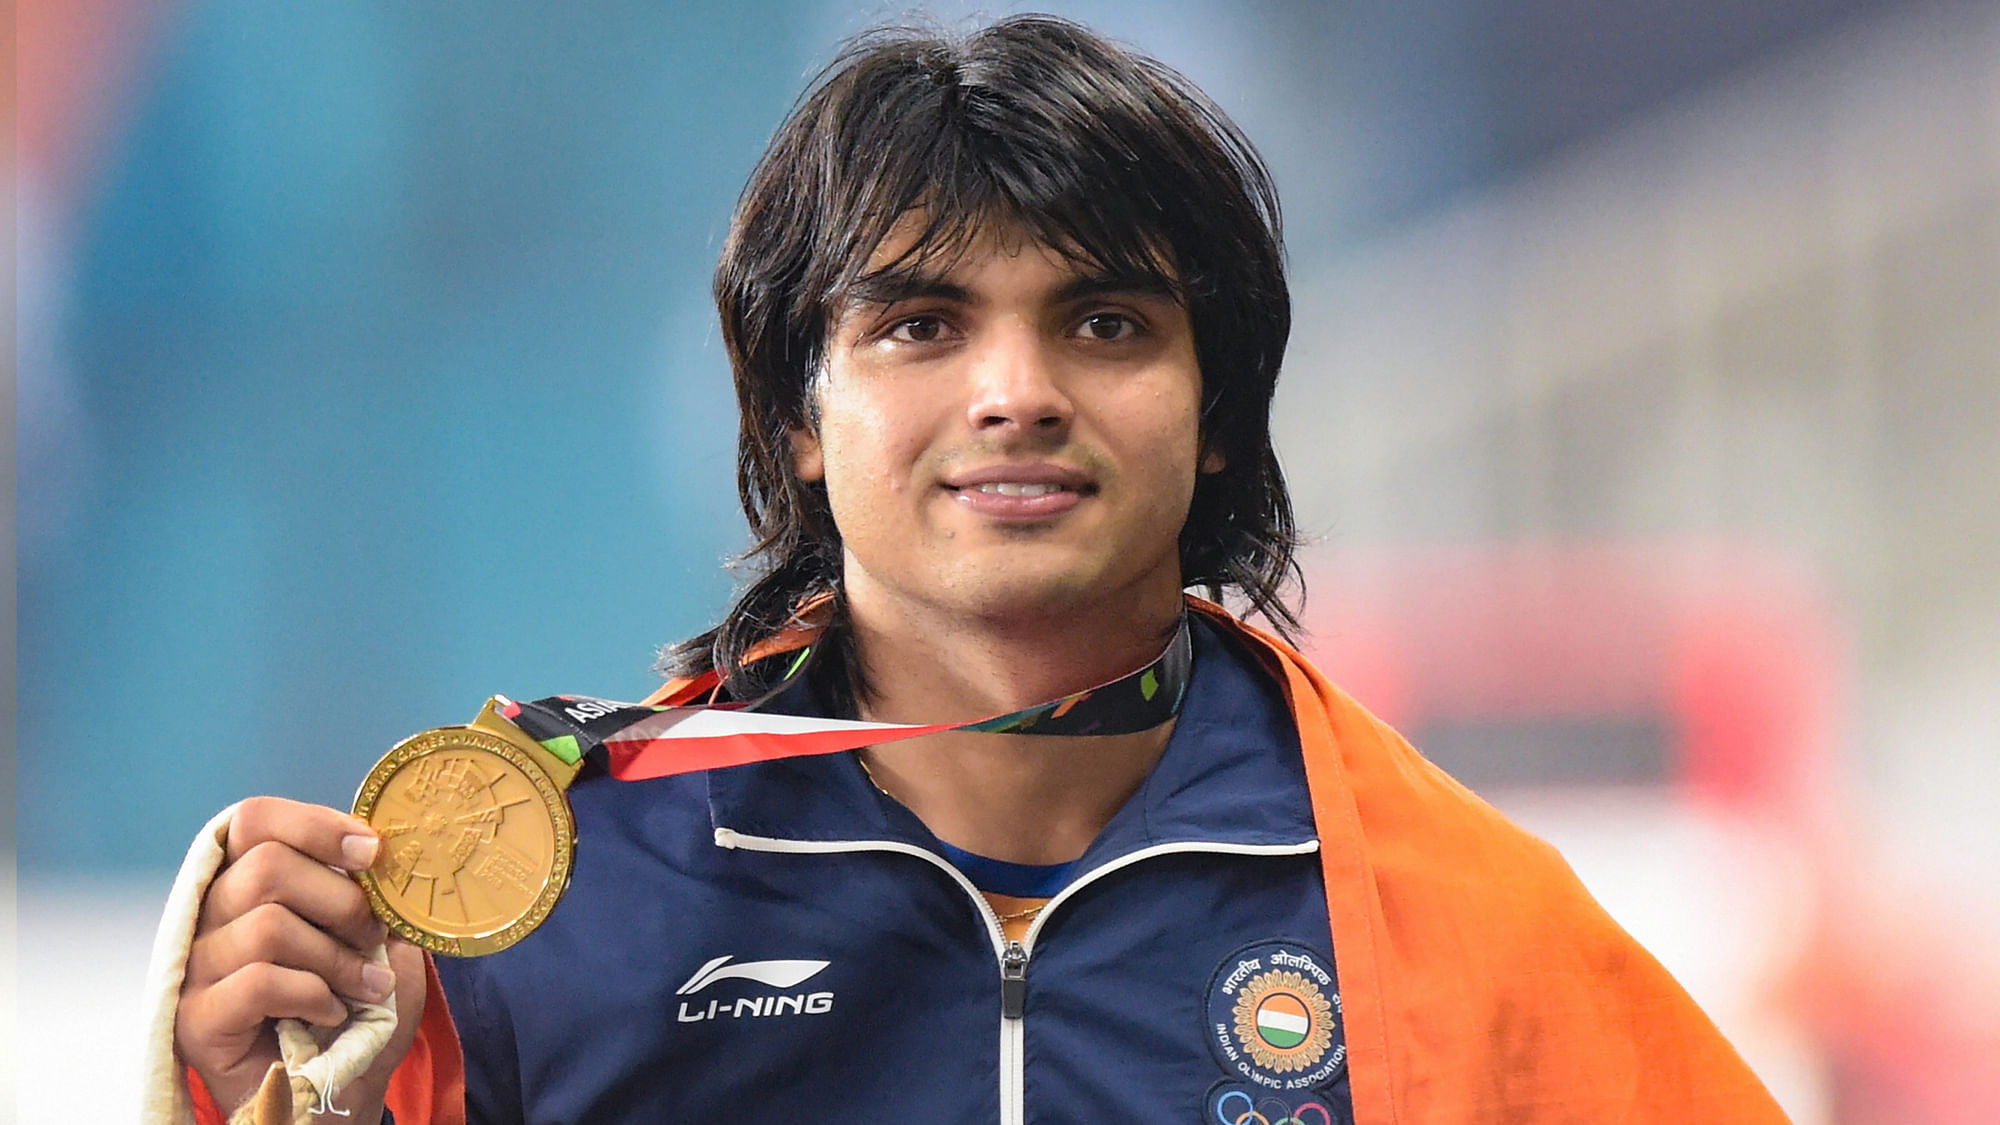 Jakarta: Gold medallist India’s Neeraj Chopra poses for photographs at the medal ceremony of the men’s javelin throw event during the 18th Asian Games 2018 in Jakarta, Indonesia.